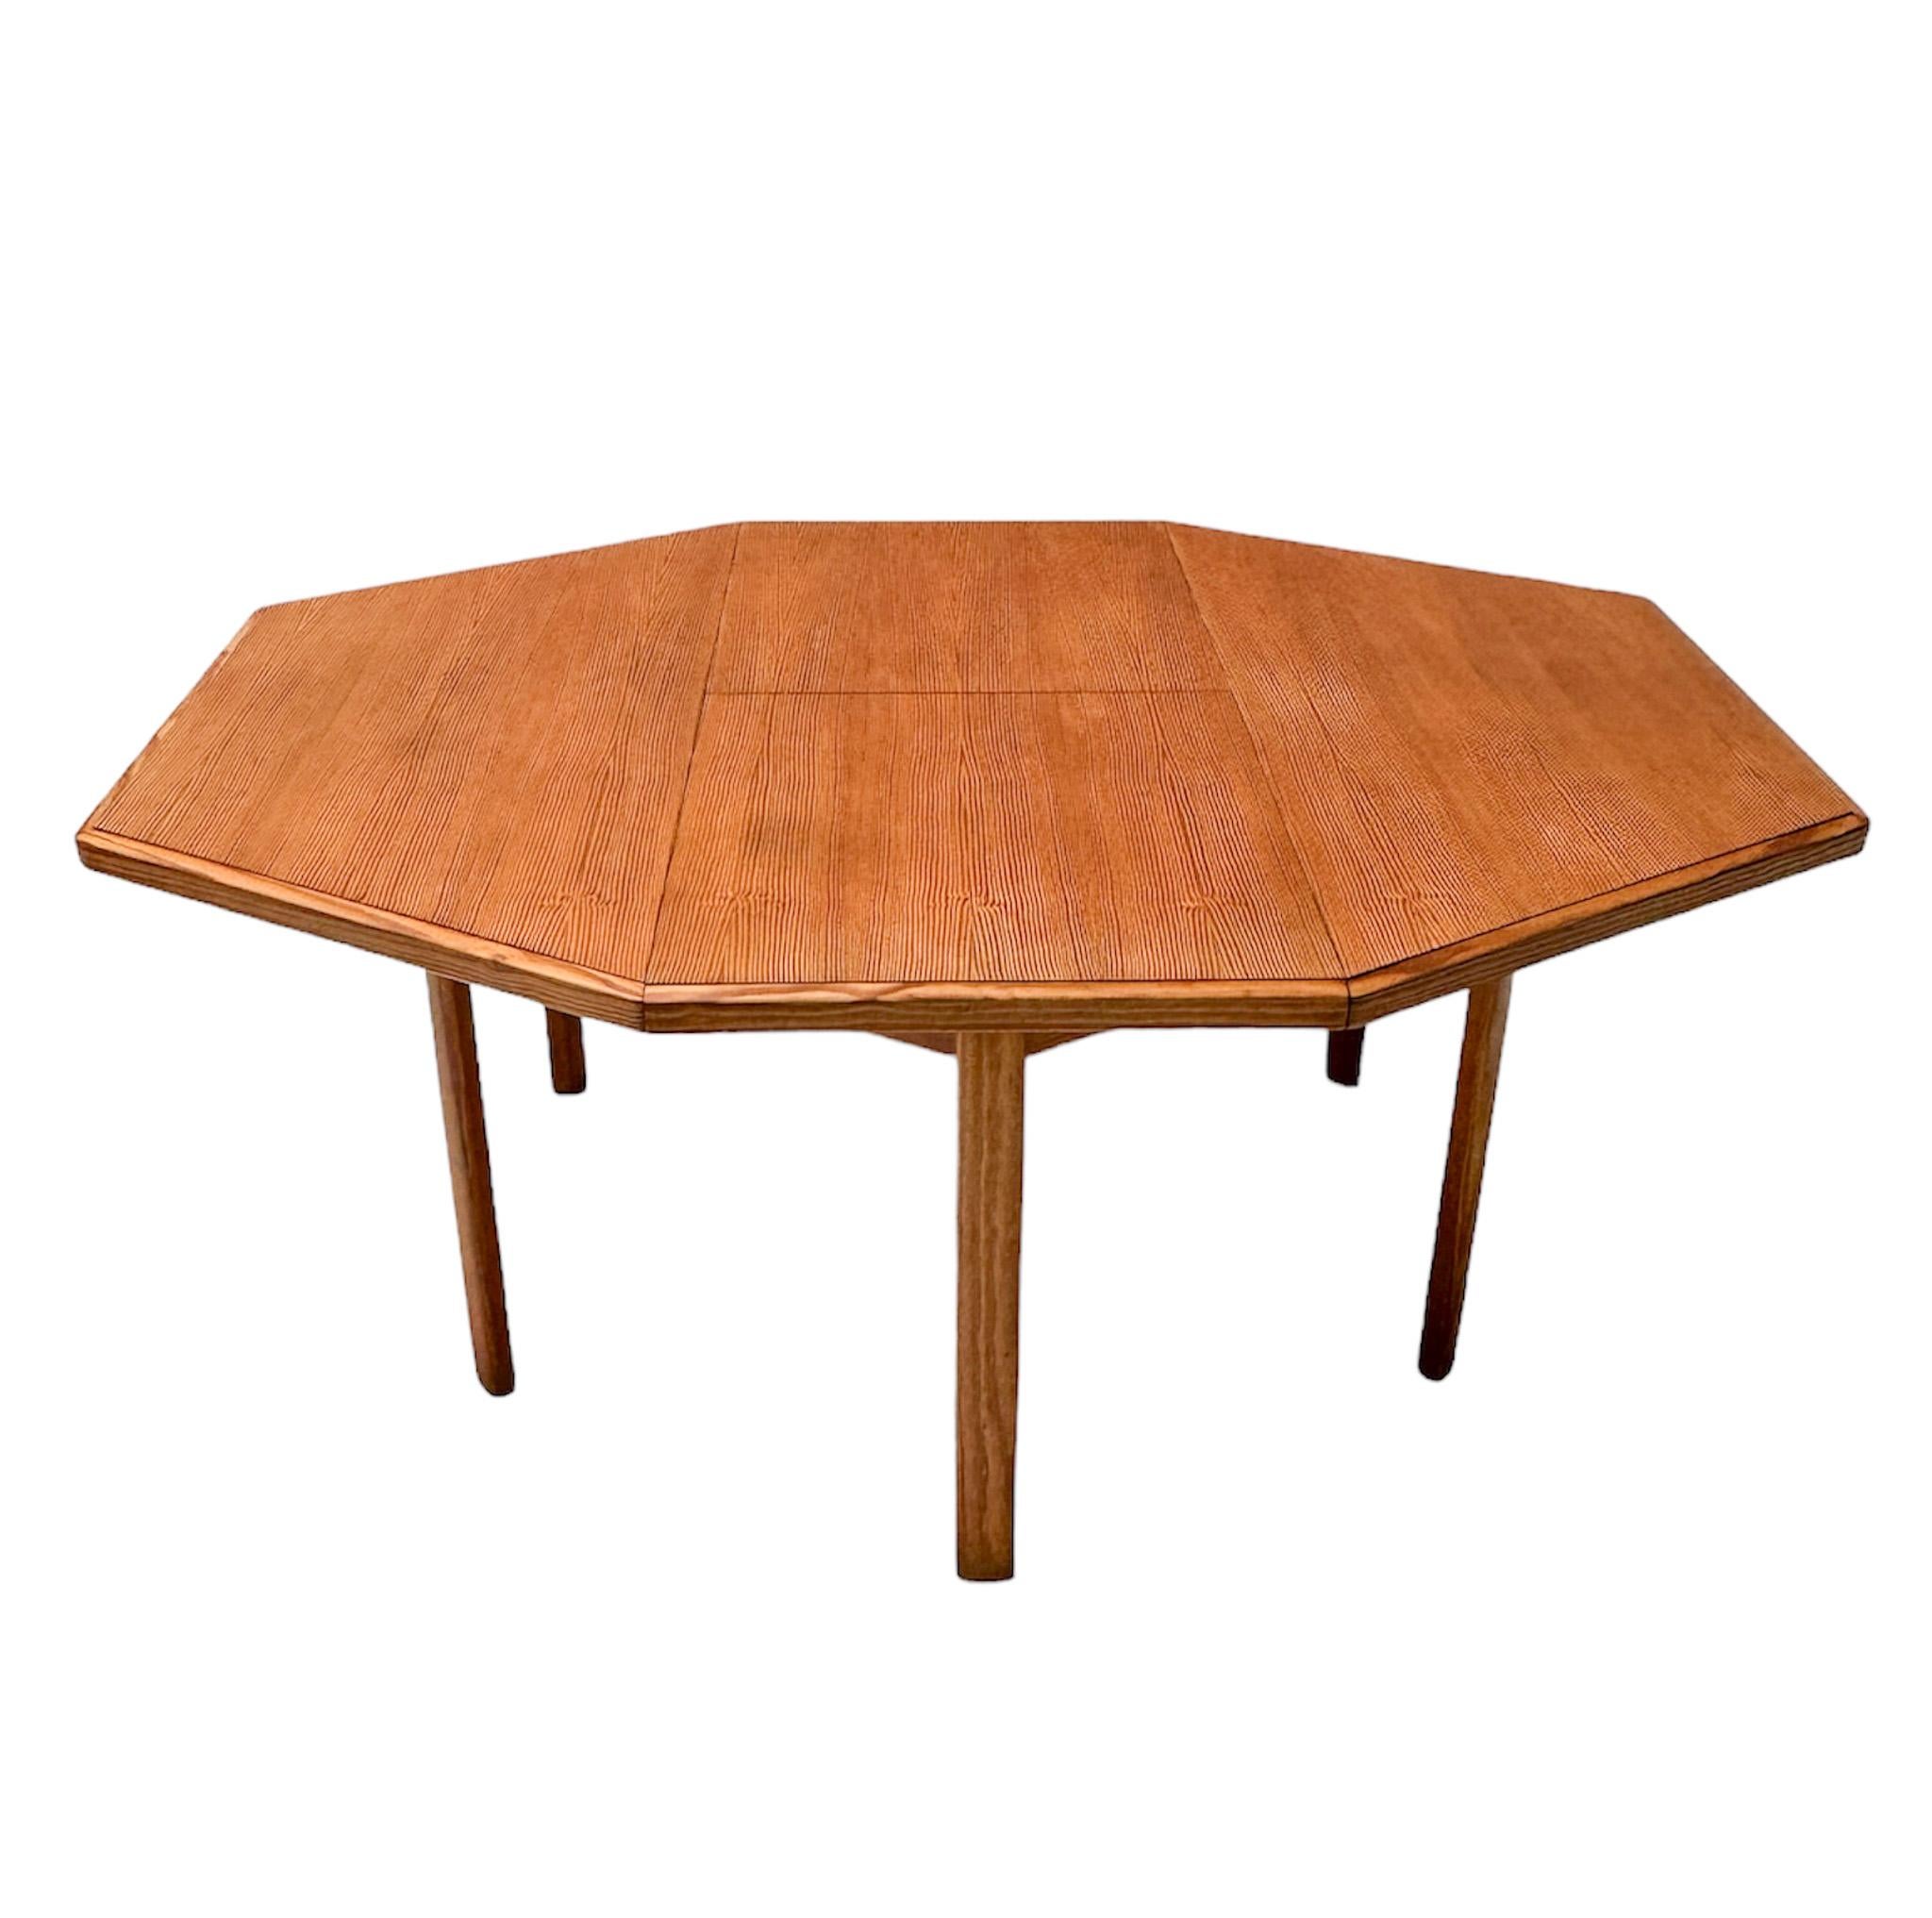 Late 20th Century French Pine Mid-Century Modern Extendable Dining Room Table, 1970s For Sale